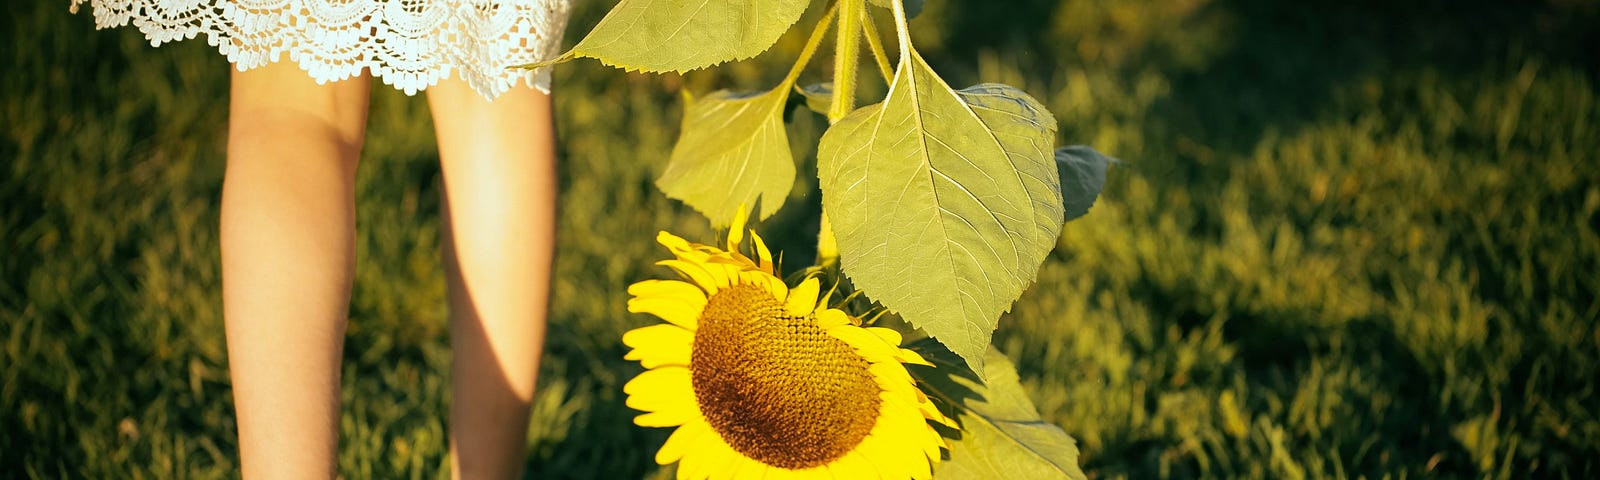 Women walking with sunflower hanging toward her feet. Mid-life is the best life.